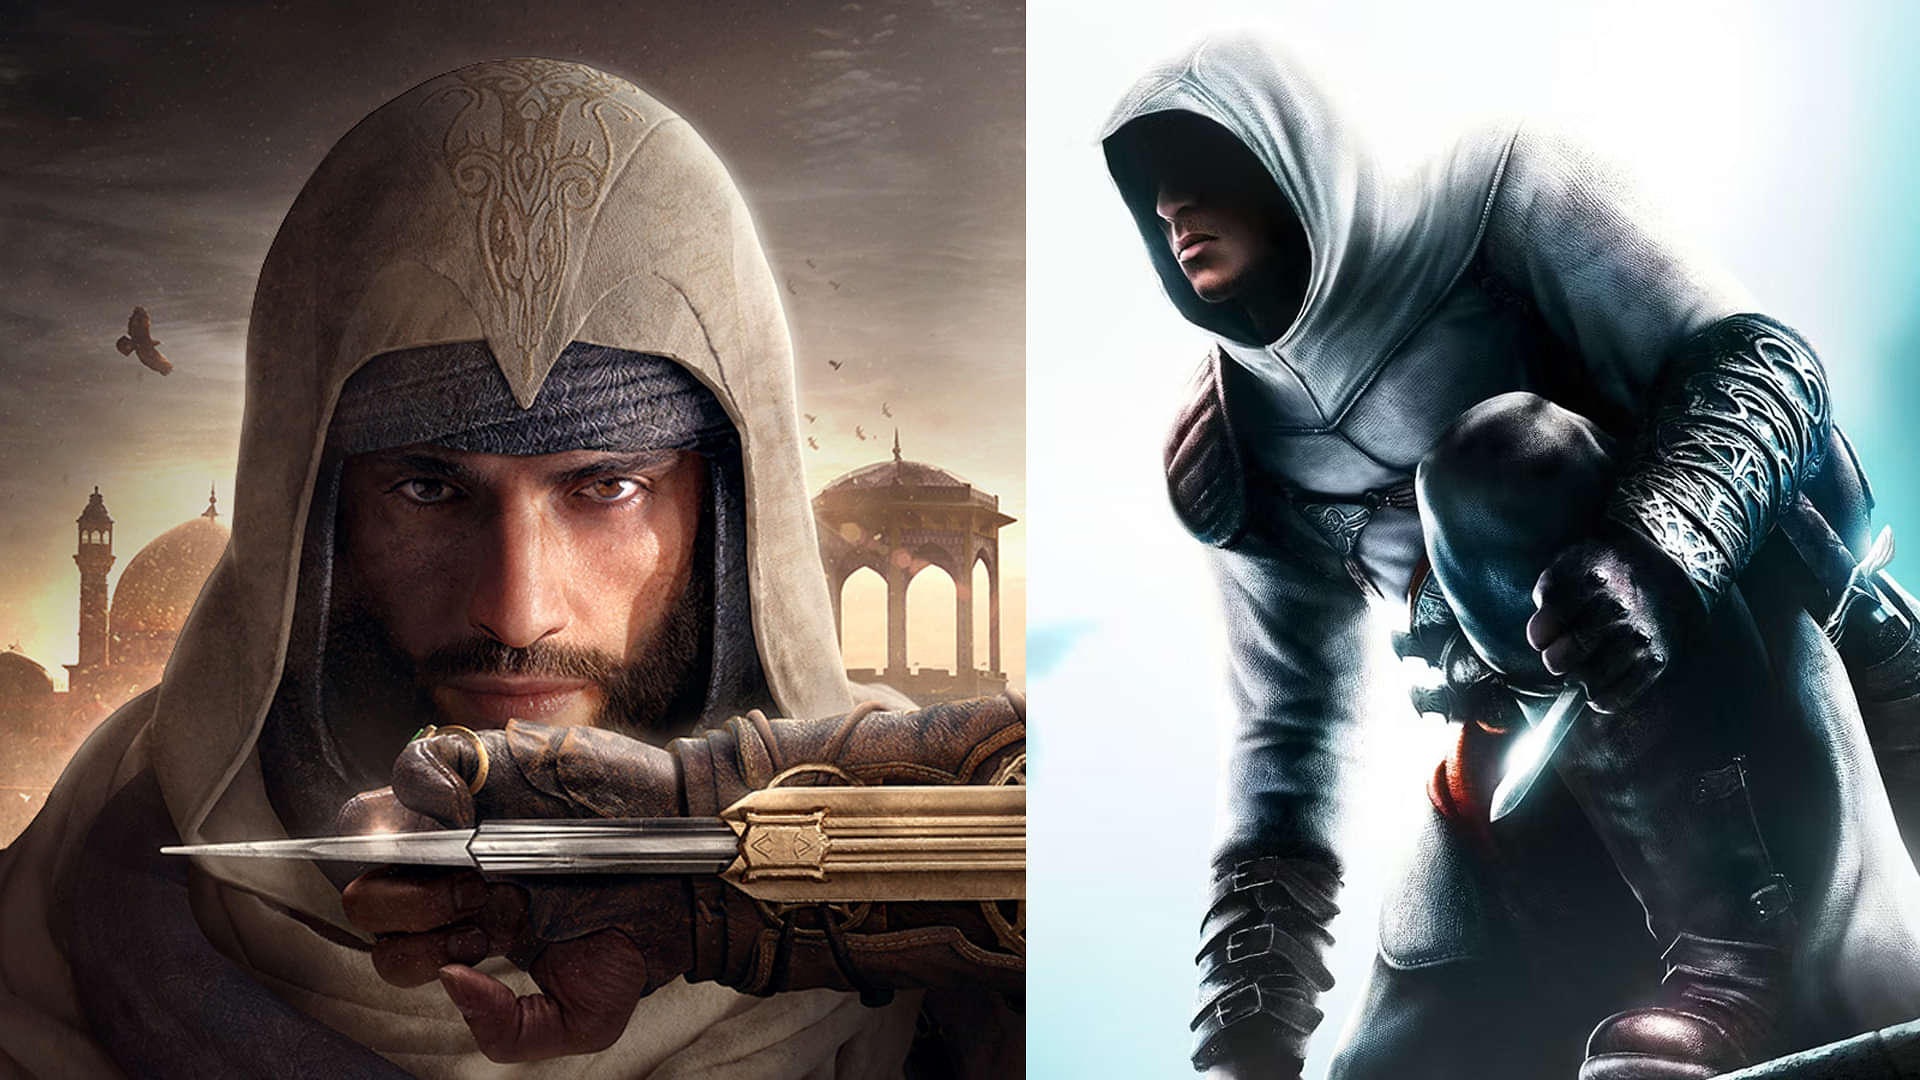 The Story of Assassin's Creed Revelations 